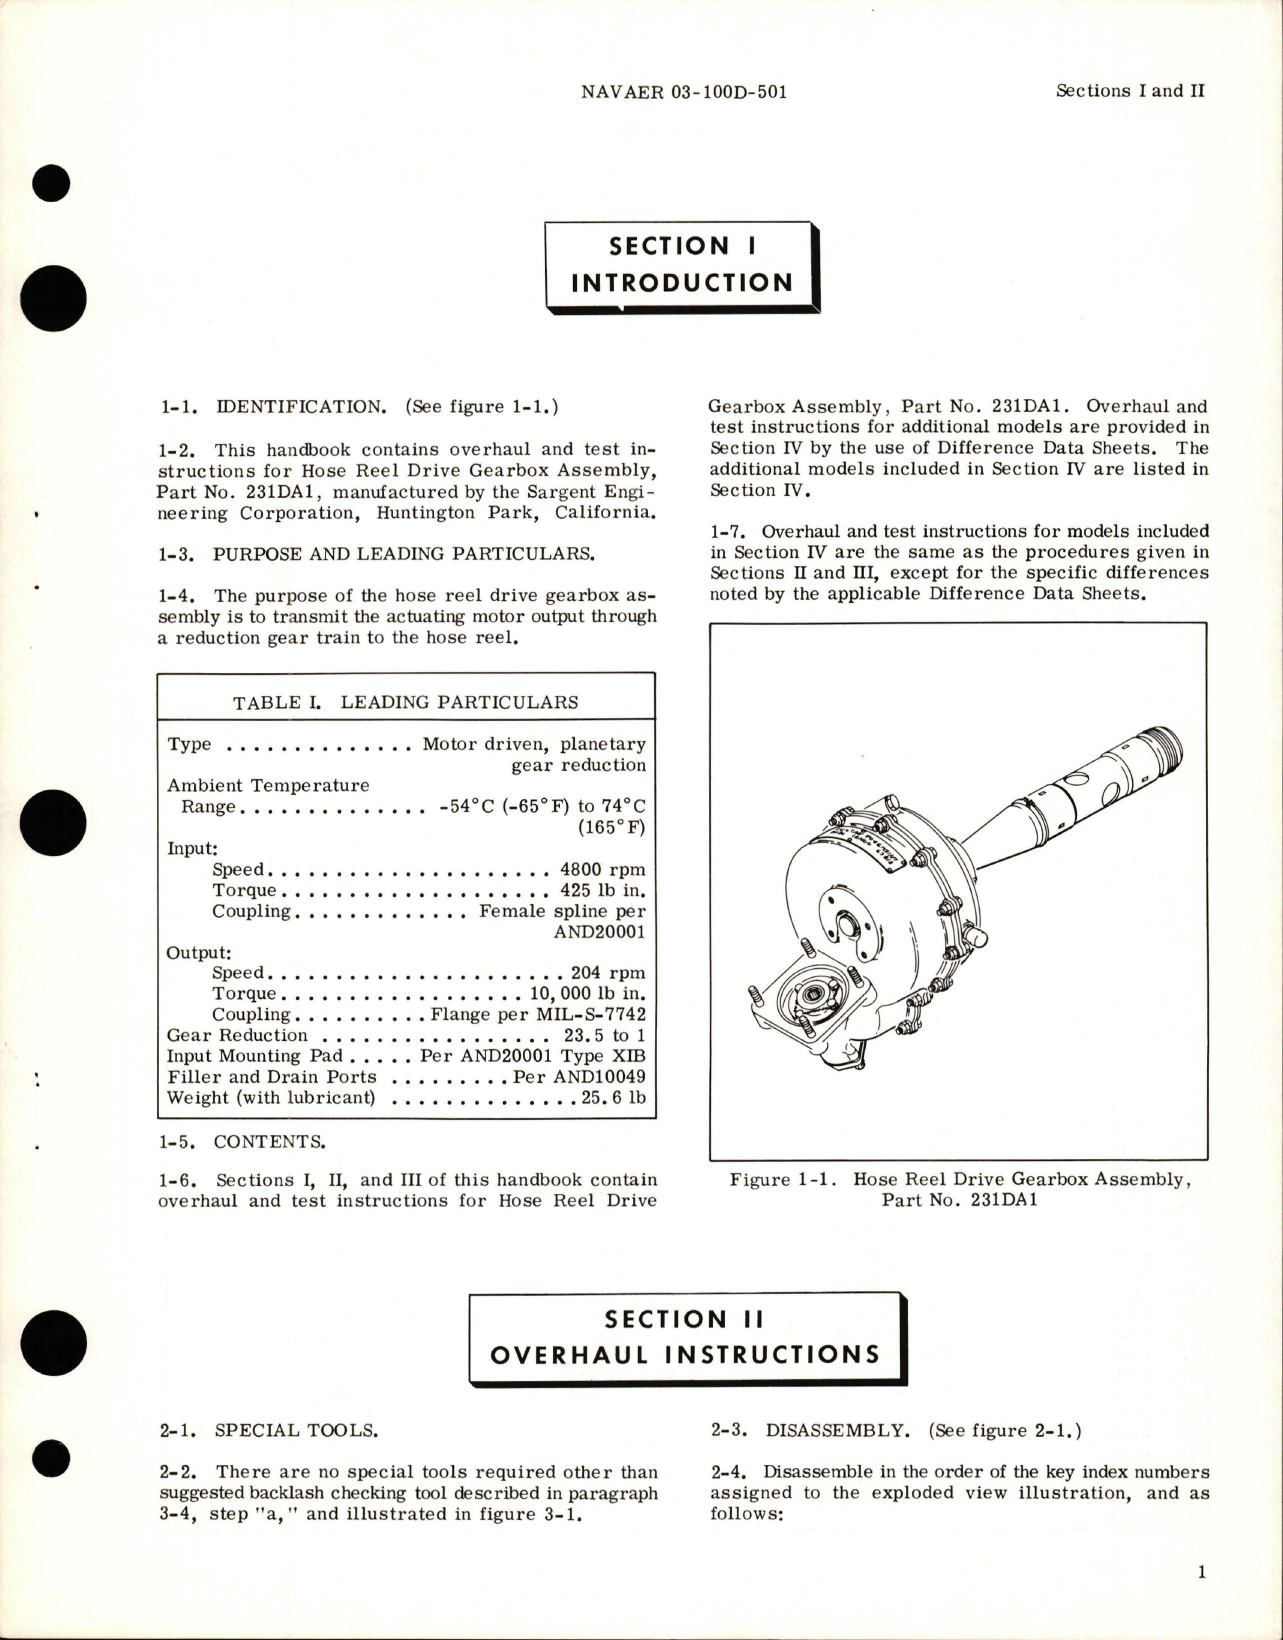 Sample page 5 from AirCorps Library document: Overhaul Instructions for Hose Reel Drive Gearbox Assembly - Part 231DA and 231DA1 